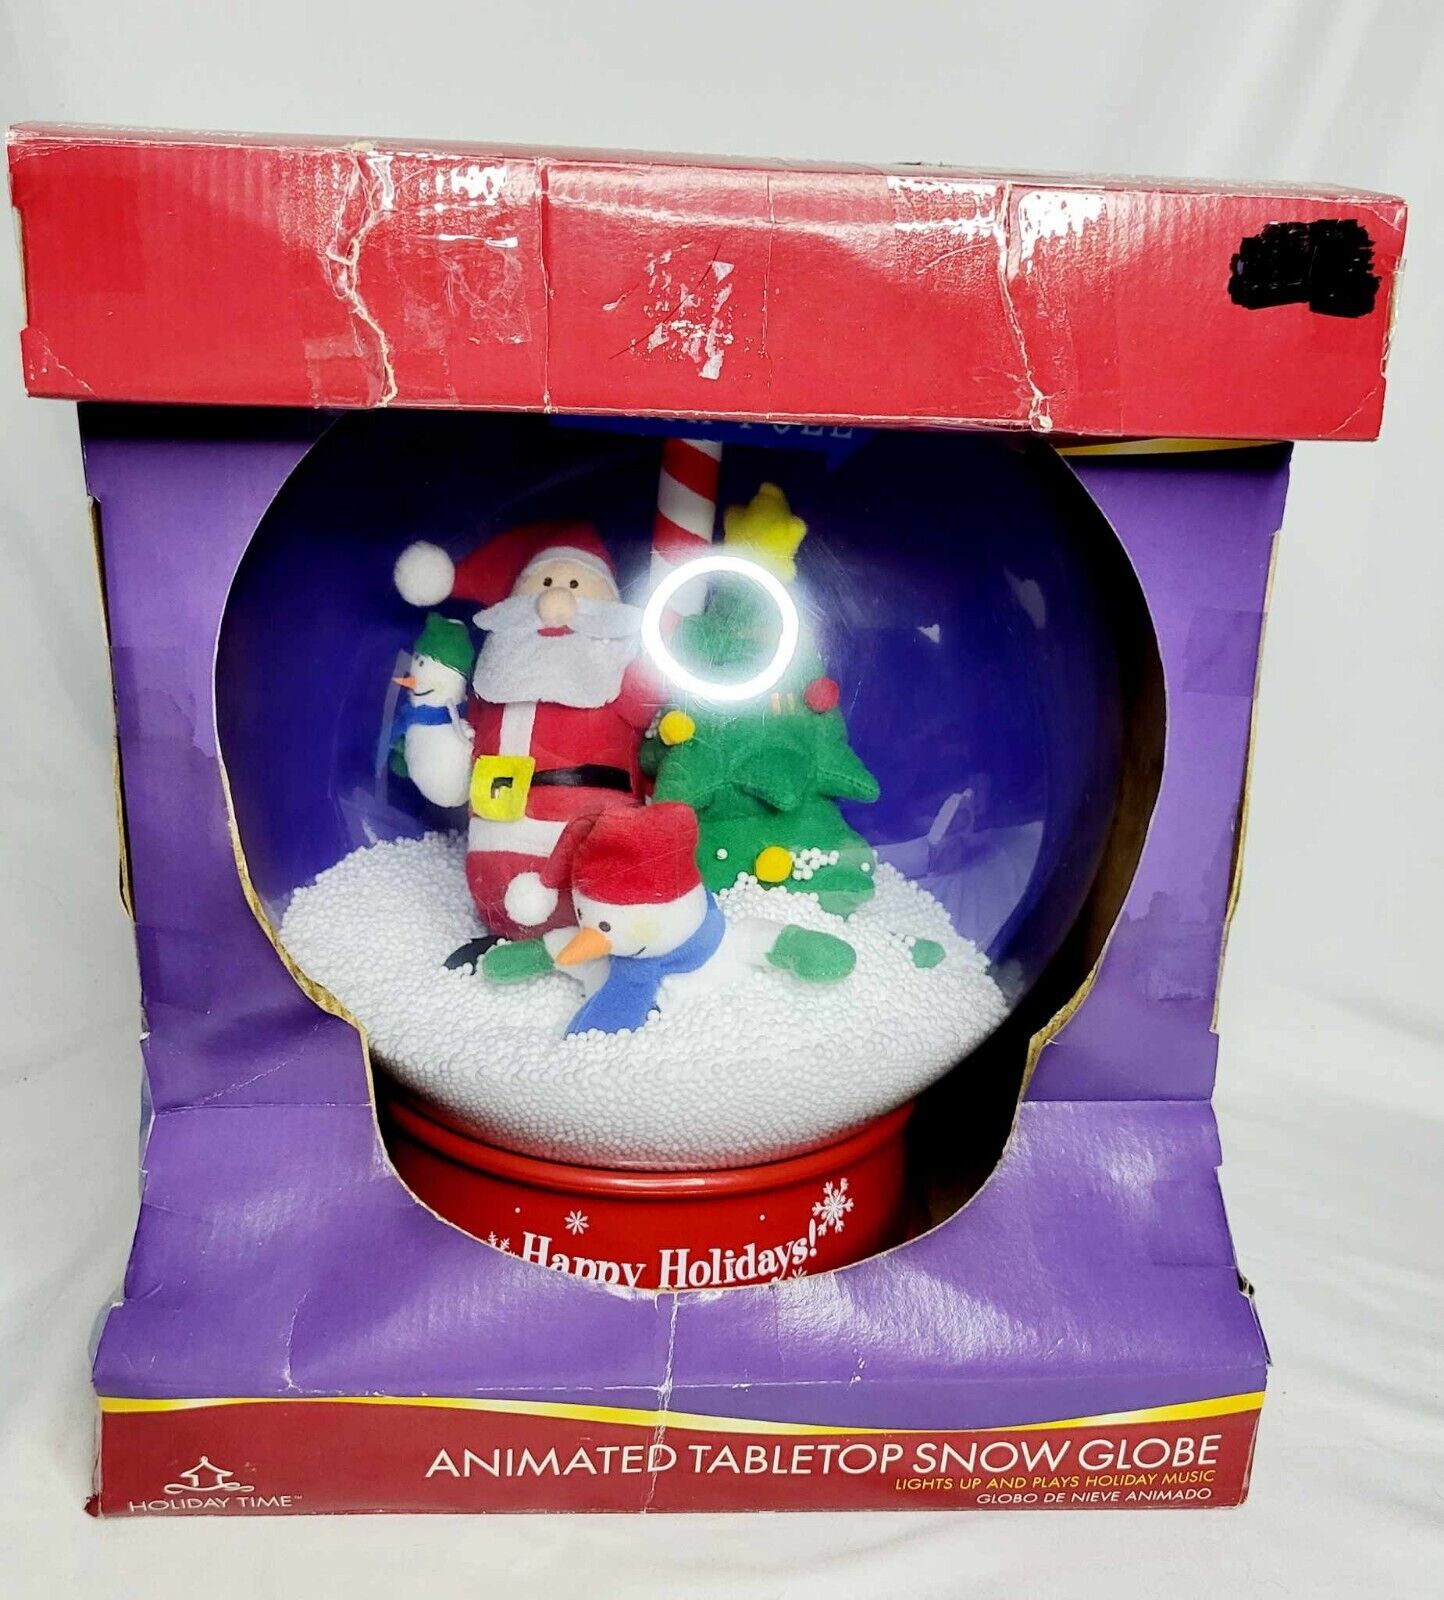 Holiday Time Animated Table Top Snow Gobe Works in Original Box